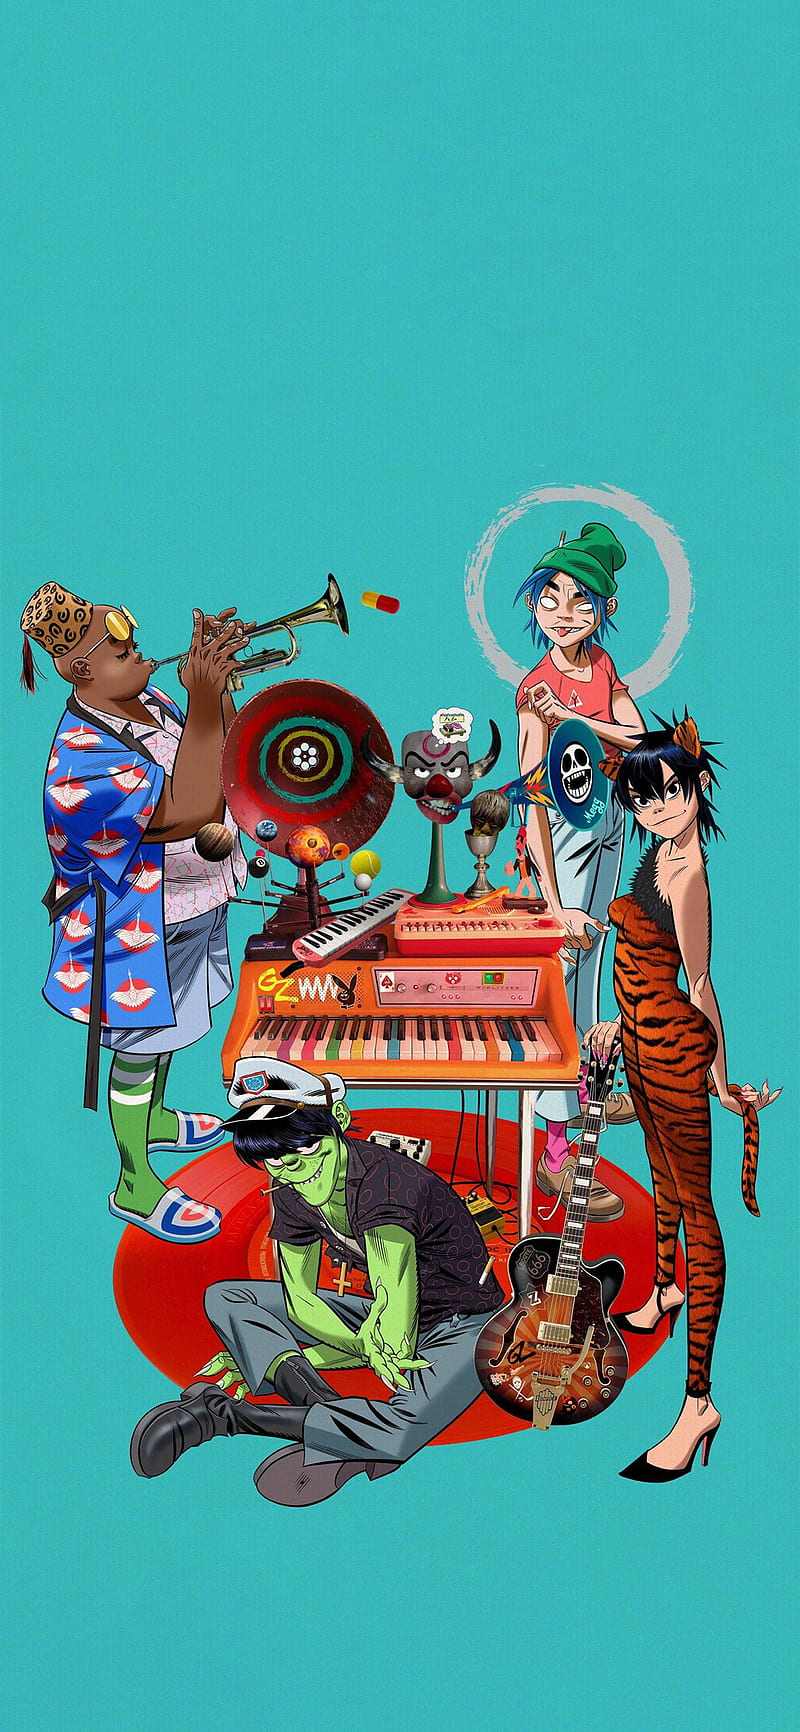 iPhone X friendly Song Machine - link to high quality and home screen (no art) version in comments: gorillaz, HD phone wallpaper